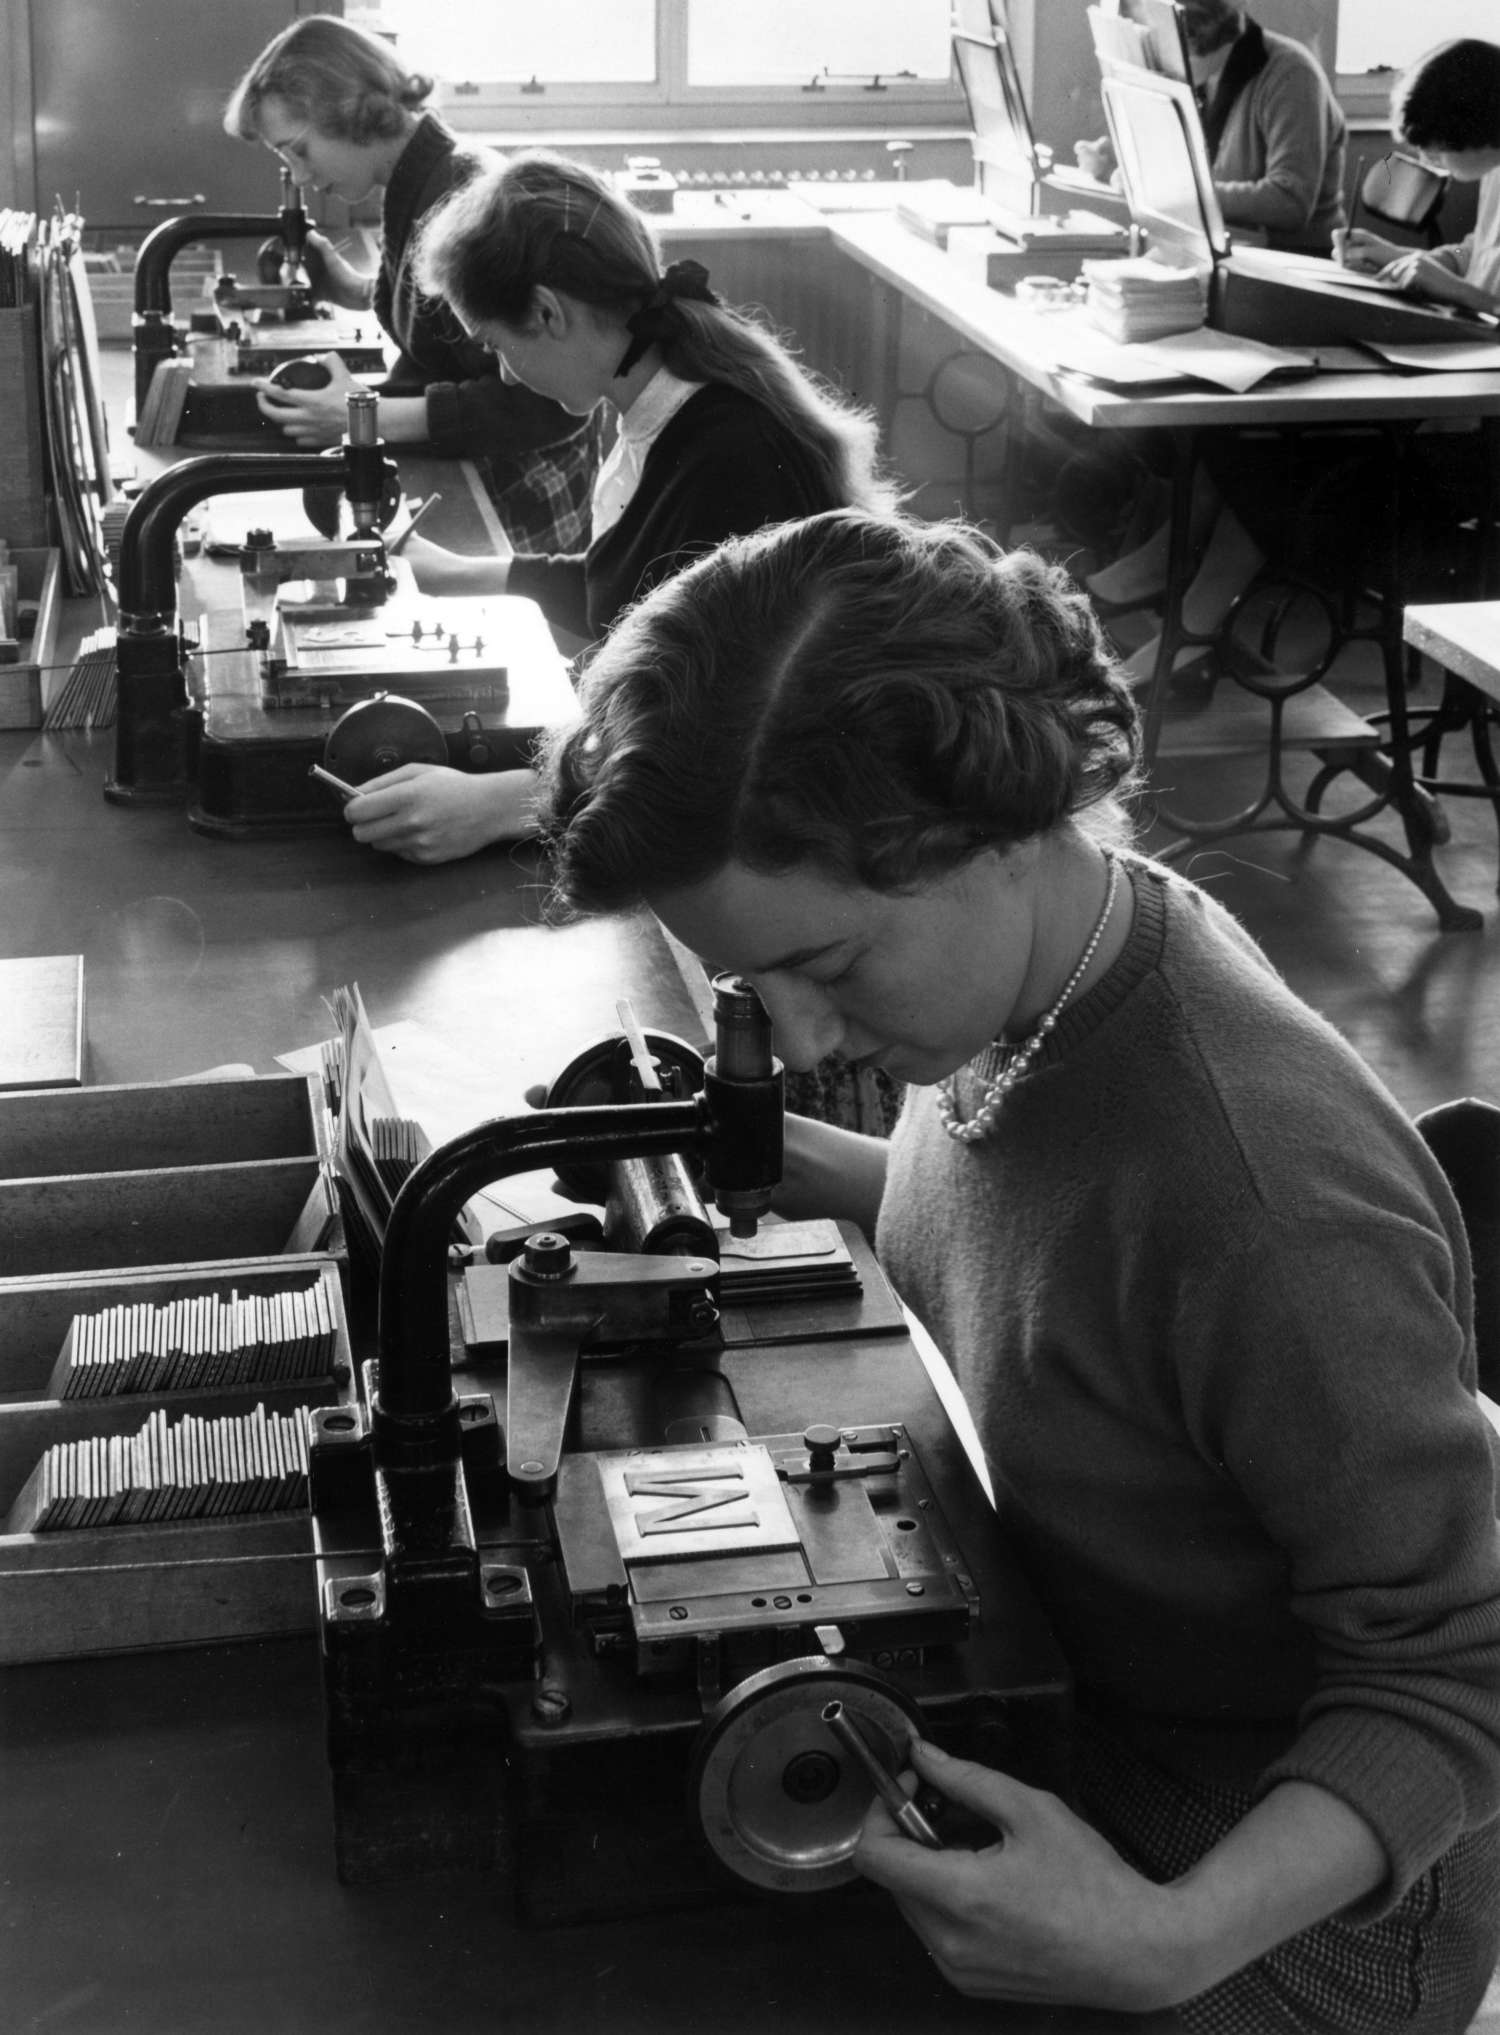 Monotype employees checking the copper patterns used for cutting punches, c. 1956. © Monotype archives